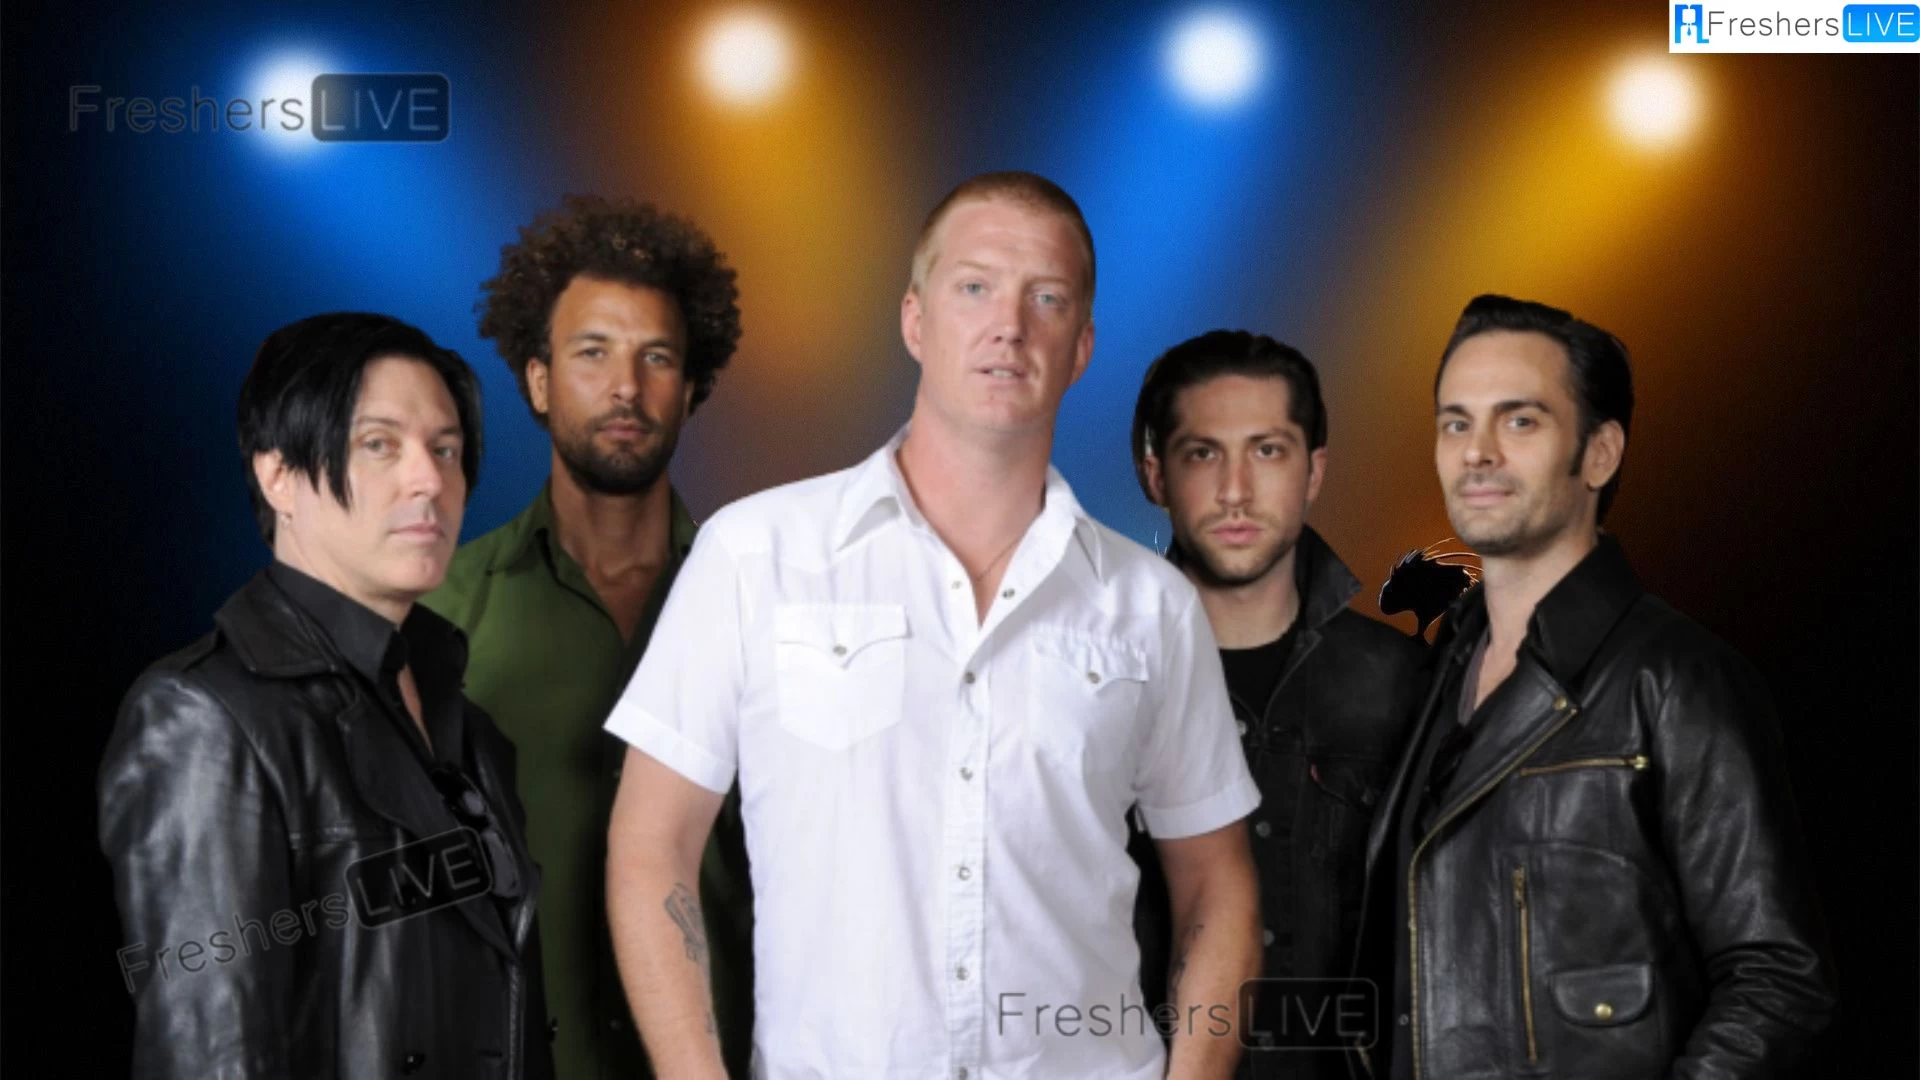 Queens of The Stone Age Presale Code 2023, How to Get Queens of The Stone Age Tickets?